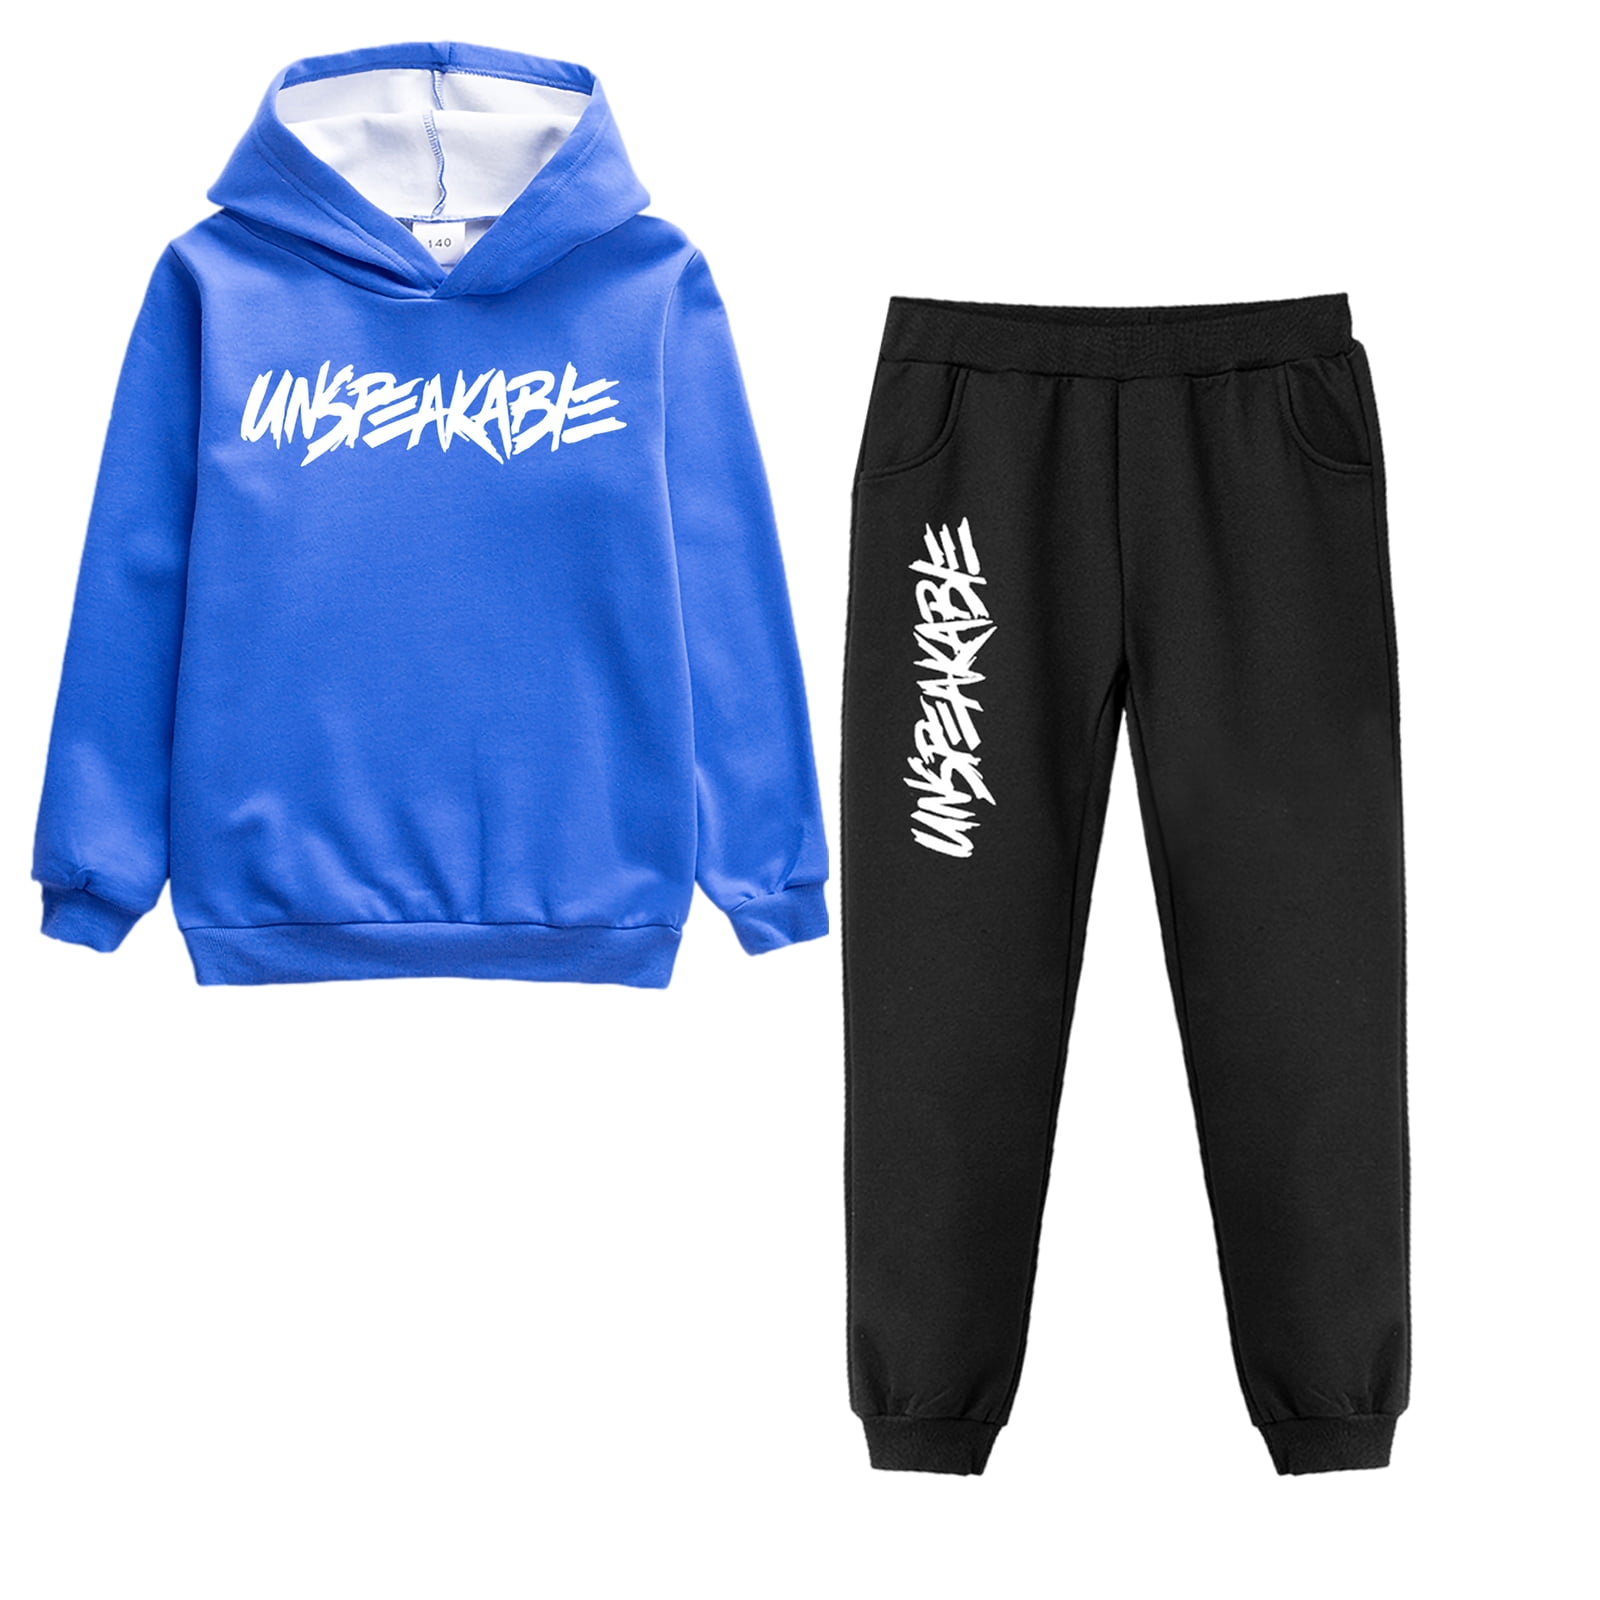 Unspeakable Boys Sports Hoodie Two-piece Kids Jumper Suit Girl Pullover and Pants